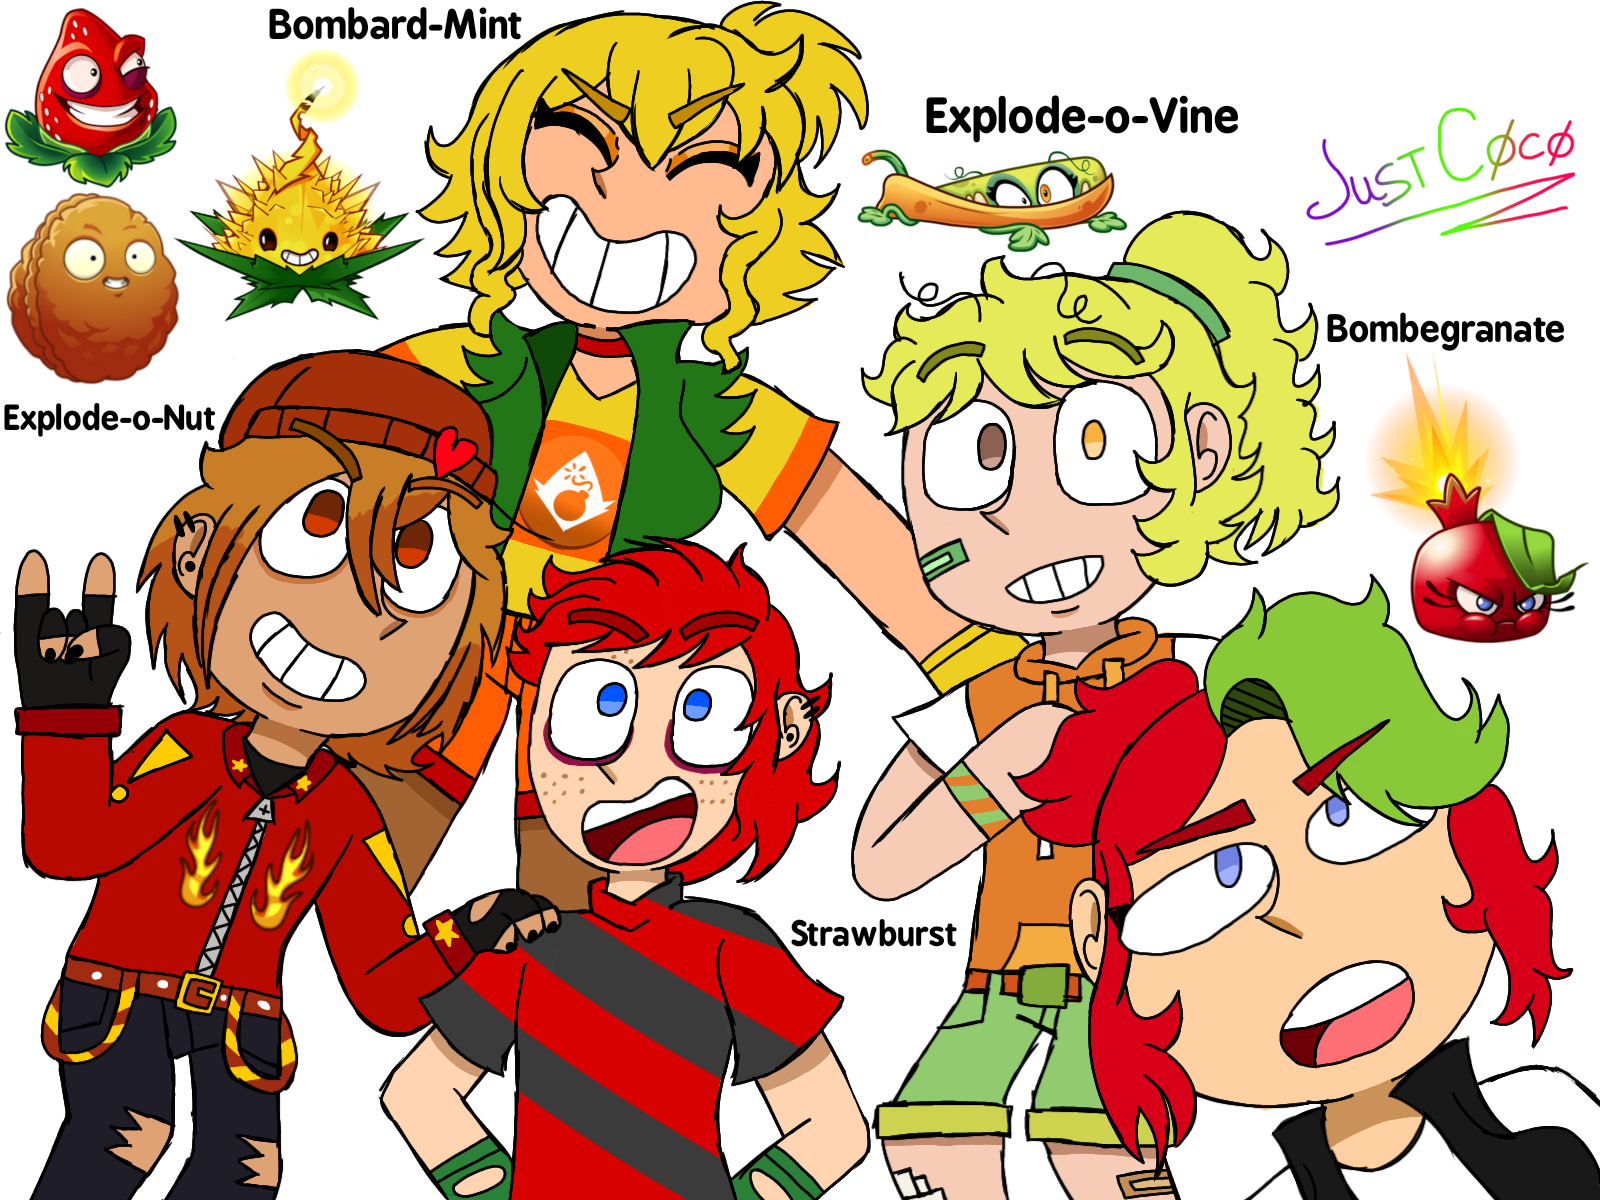 Plants vs Zombies 2 // Some requests by JustCoco238916 on DeviantArt